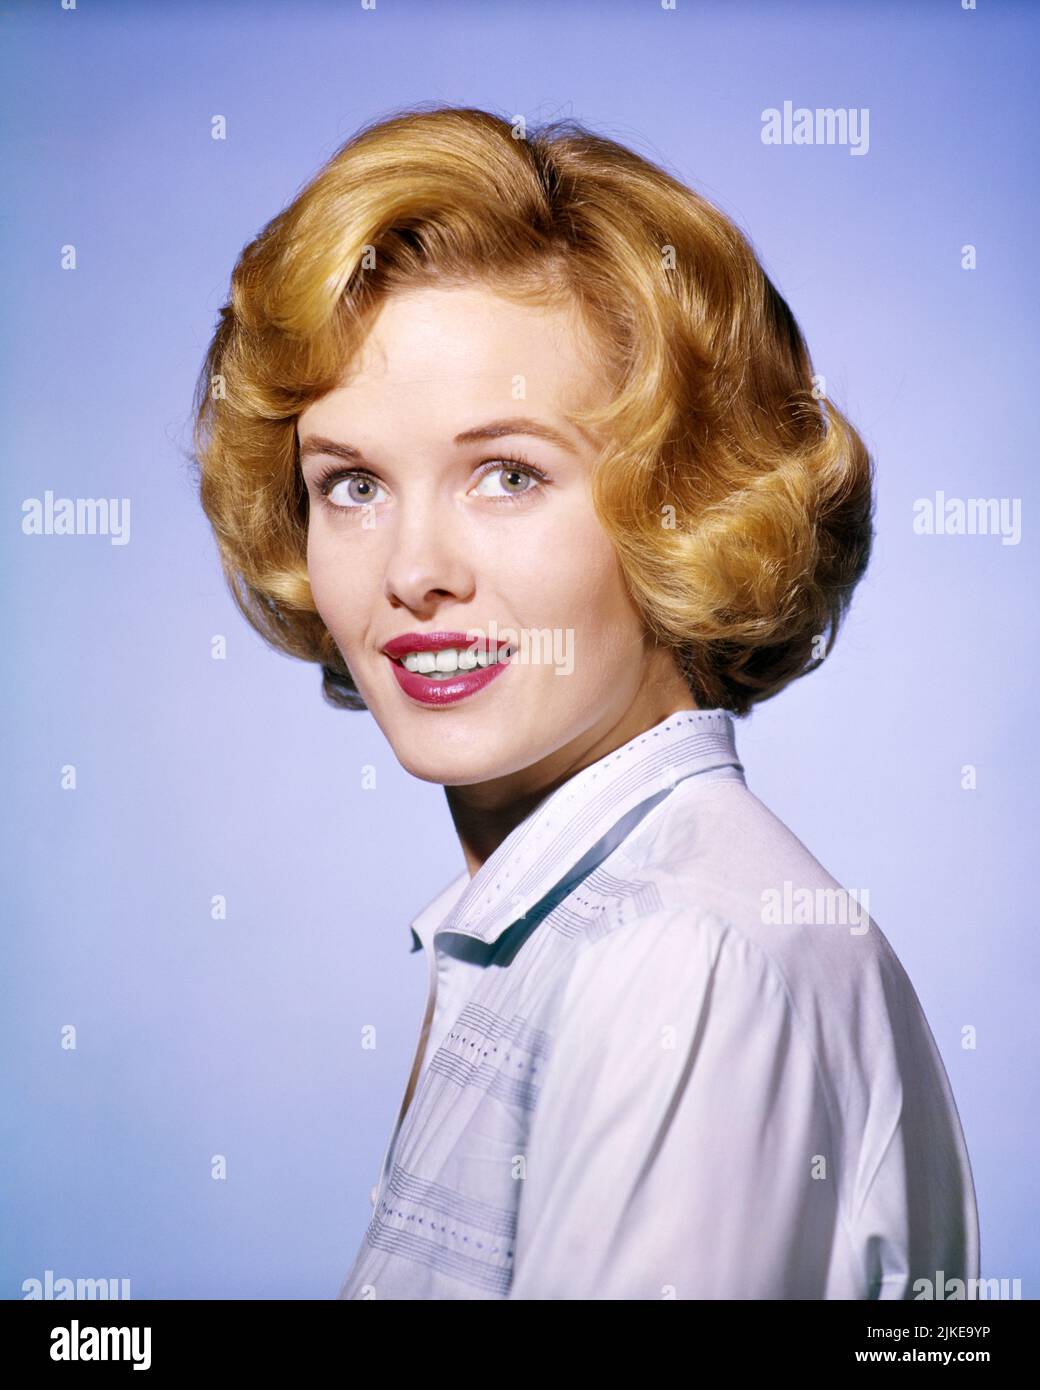 1960s SMILING WOMAN PORTRAIT LOOKING AT CAMERA IN WHITE BLOUSE GOLDEN HAIR RED LIPSTICK  - kg1467 DEB001 HARS EXPRESSIONS EYE CONTACT HAPPINESS HEAD AND SHOULDERS CHEERFUL HAIRSTYLE LIPSTICK BLOUSE SMILES CONNECTION WAVY GREEN EYES JOYFUL STYLISH WHITE BLOUSE DEB001 PLEASANT TEASED YOUNG ADULT WOMAN BOUFFANT DIRECT OLD FASHIONED Stock Photo